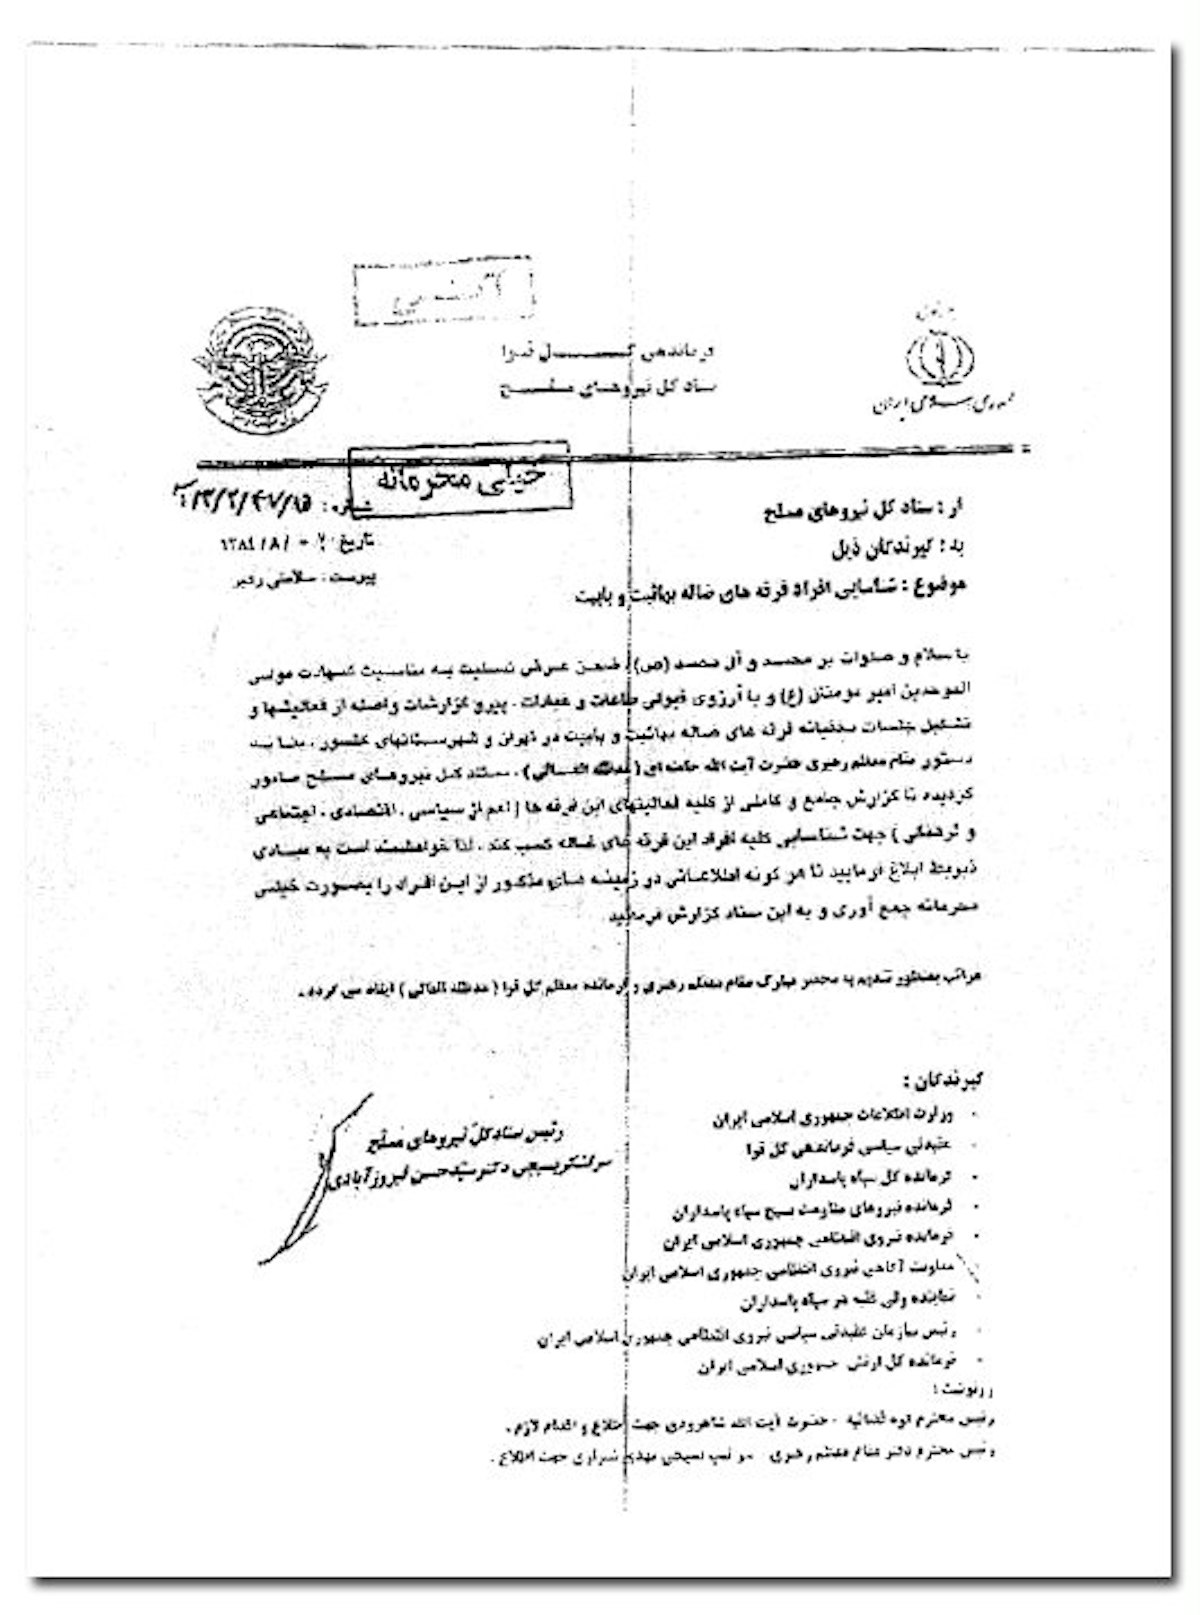 The text a secret letter from Iranian military headquarters instructing commanders of various state intelligence services, police units, and the Revolutionary Guard to "identify" and "monitor" Baha'is has now been made public. Shown here is the original letter in Persian.